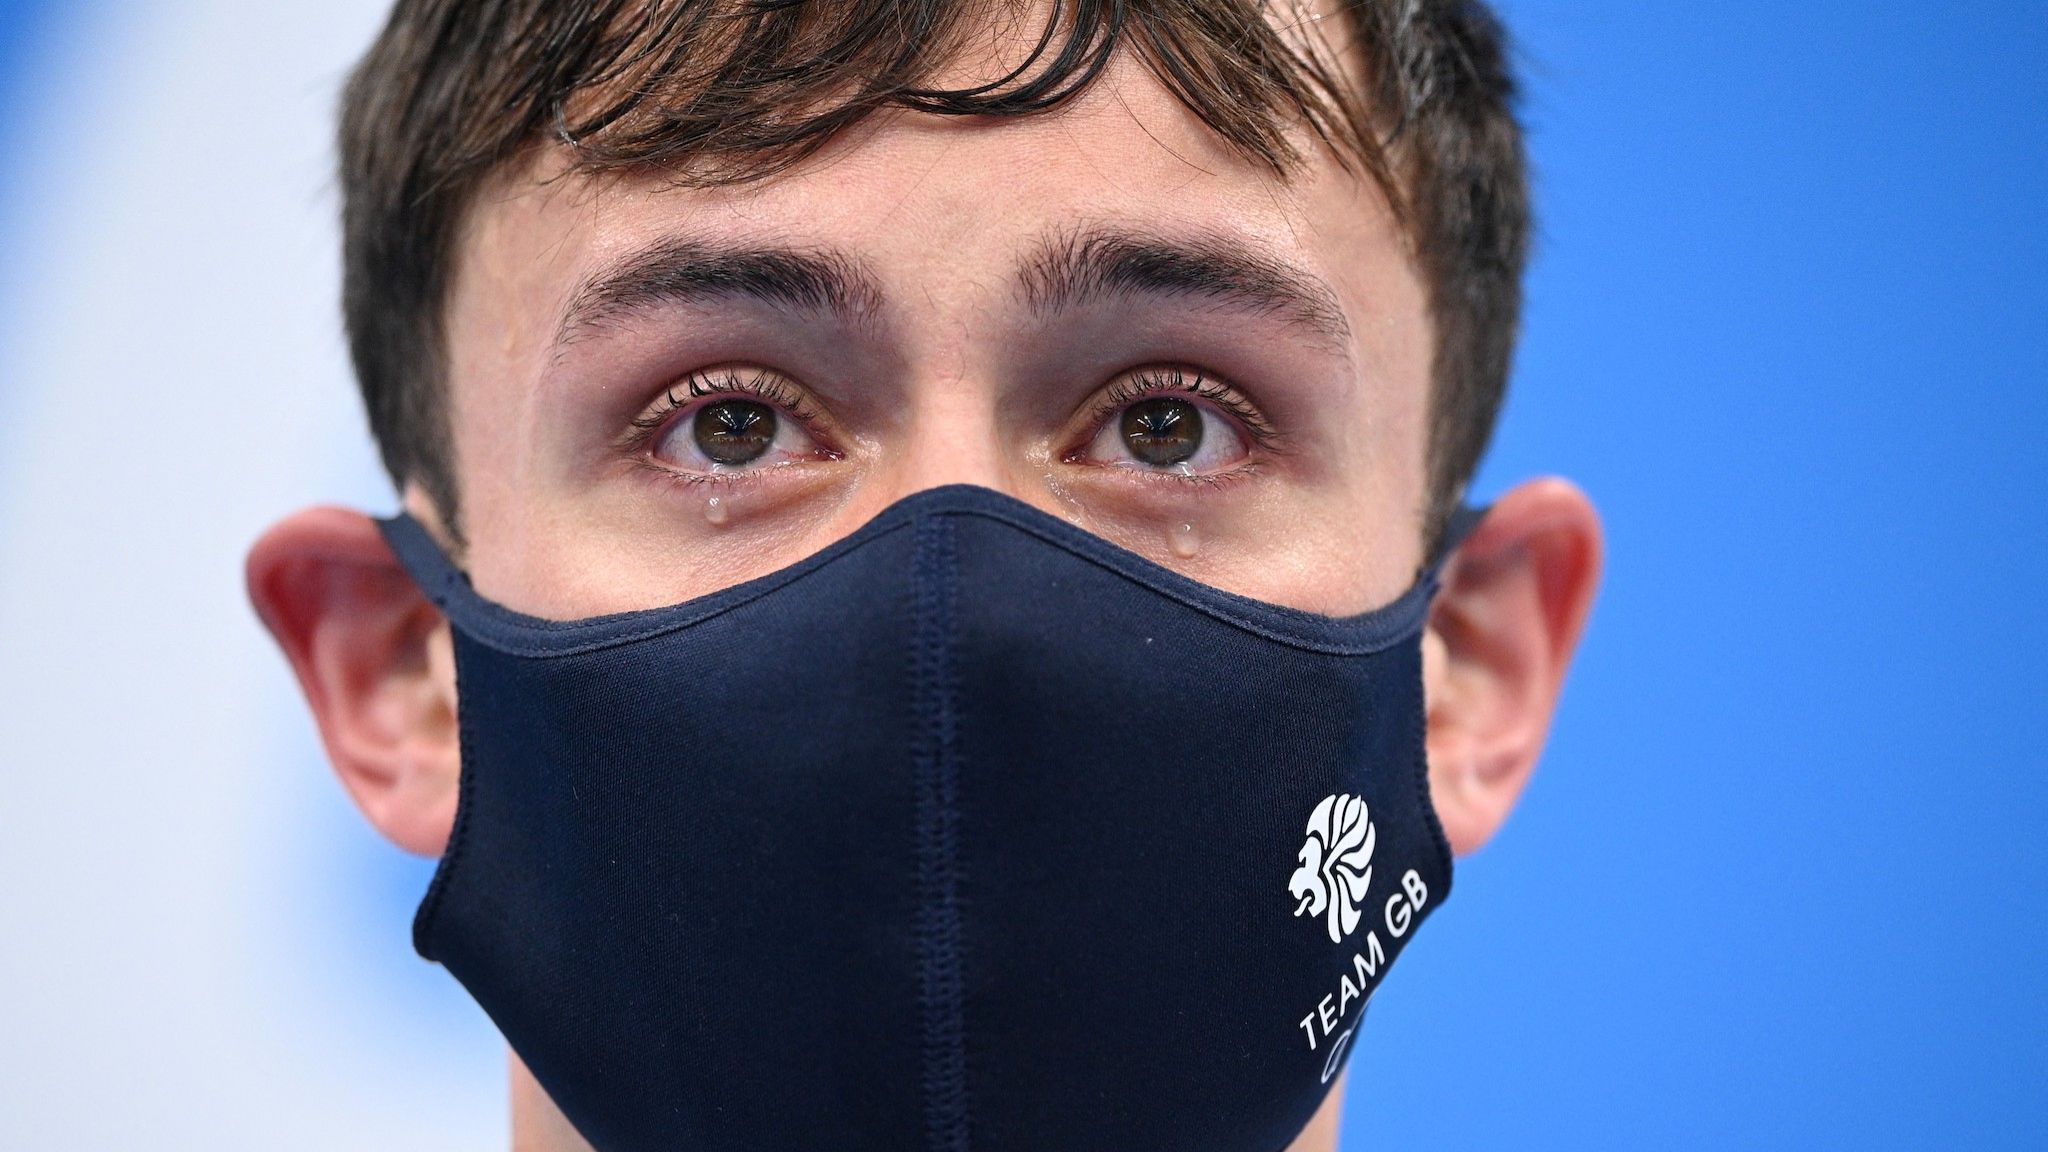 Tom Daley in tears on the podium